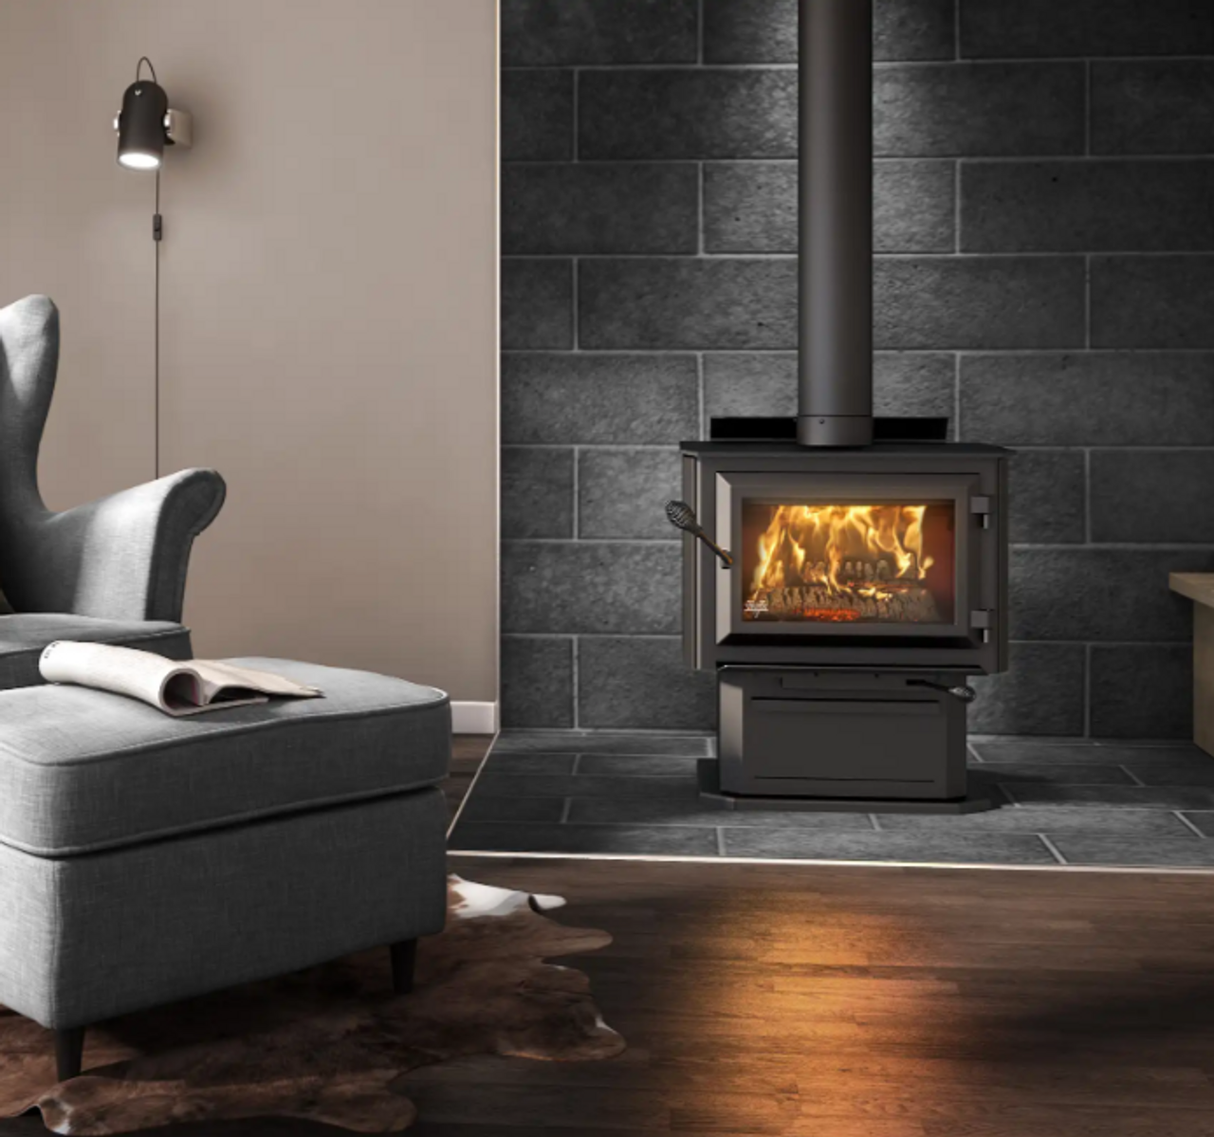 Ventis HES170 Wood Stove